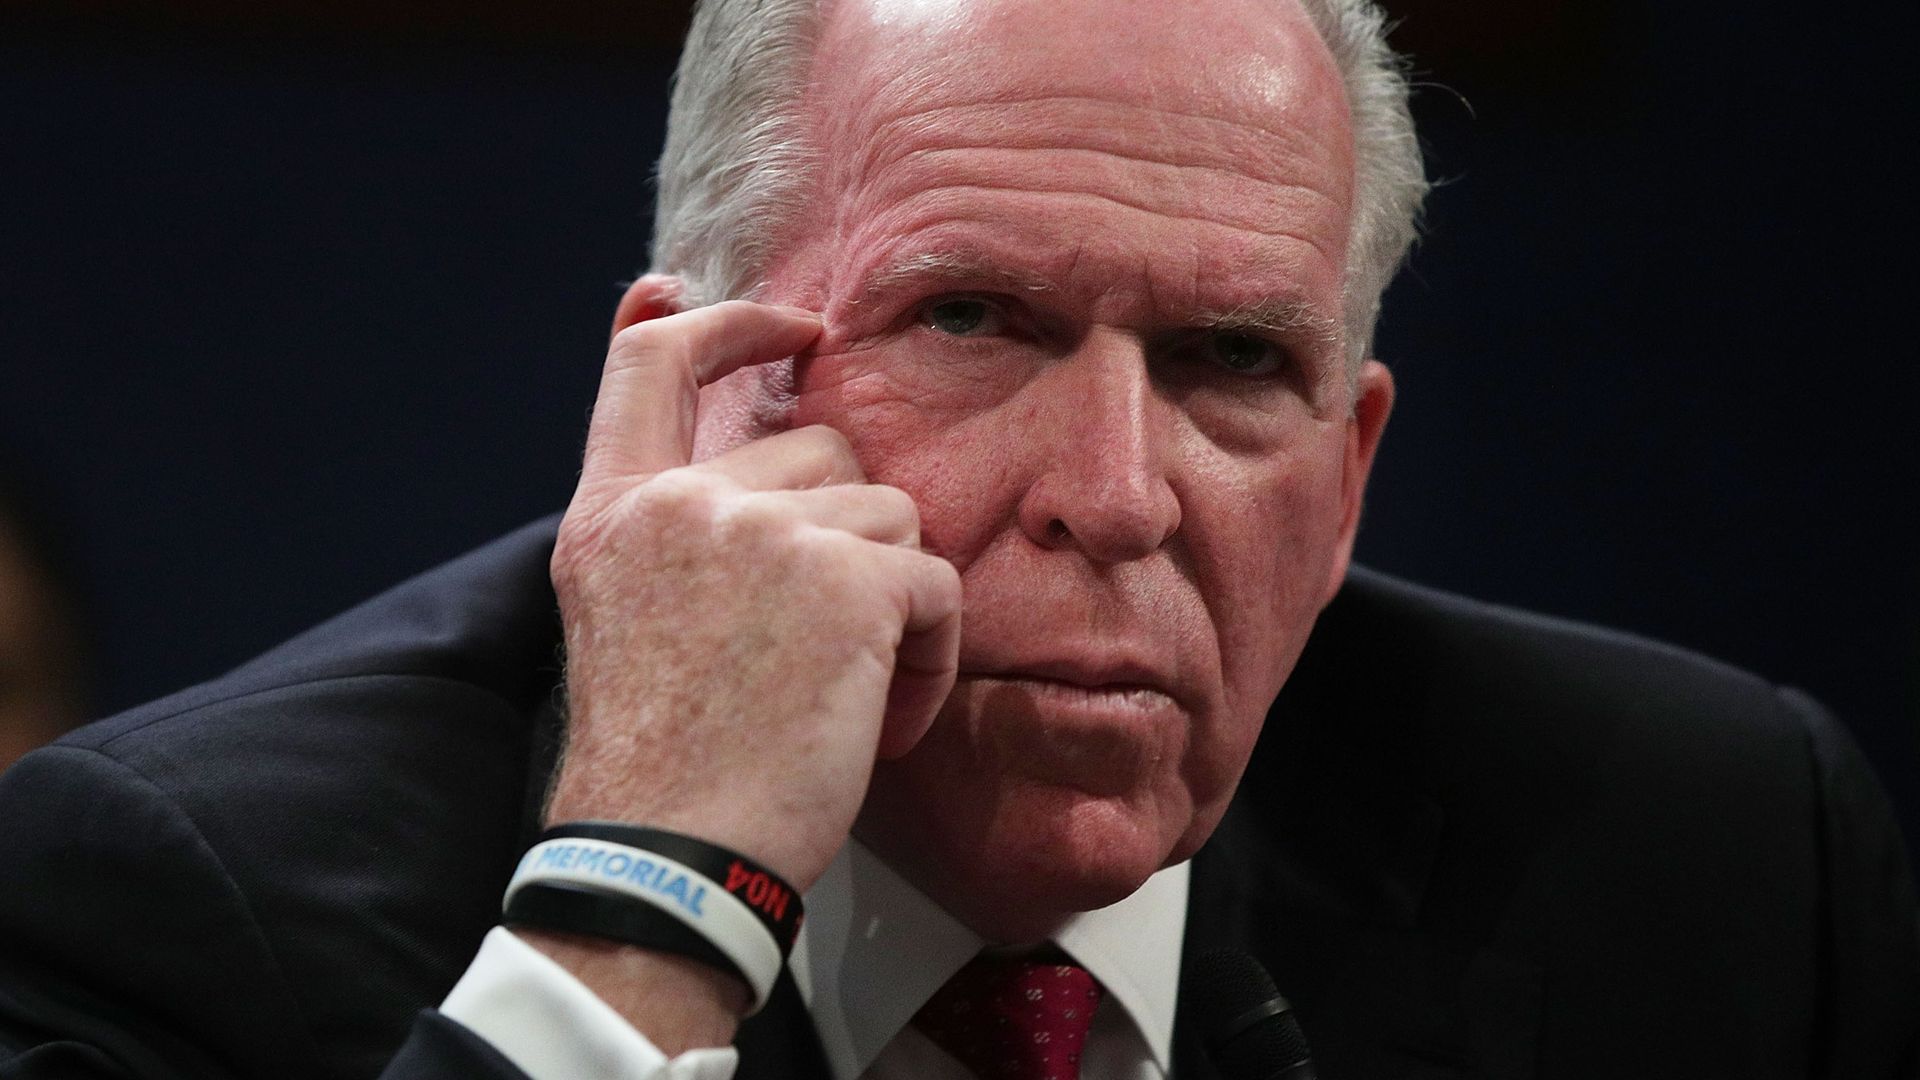 John Brennan with hand resting on side of his head, looking contemplative